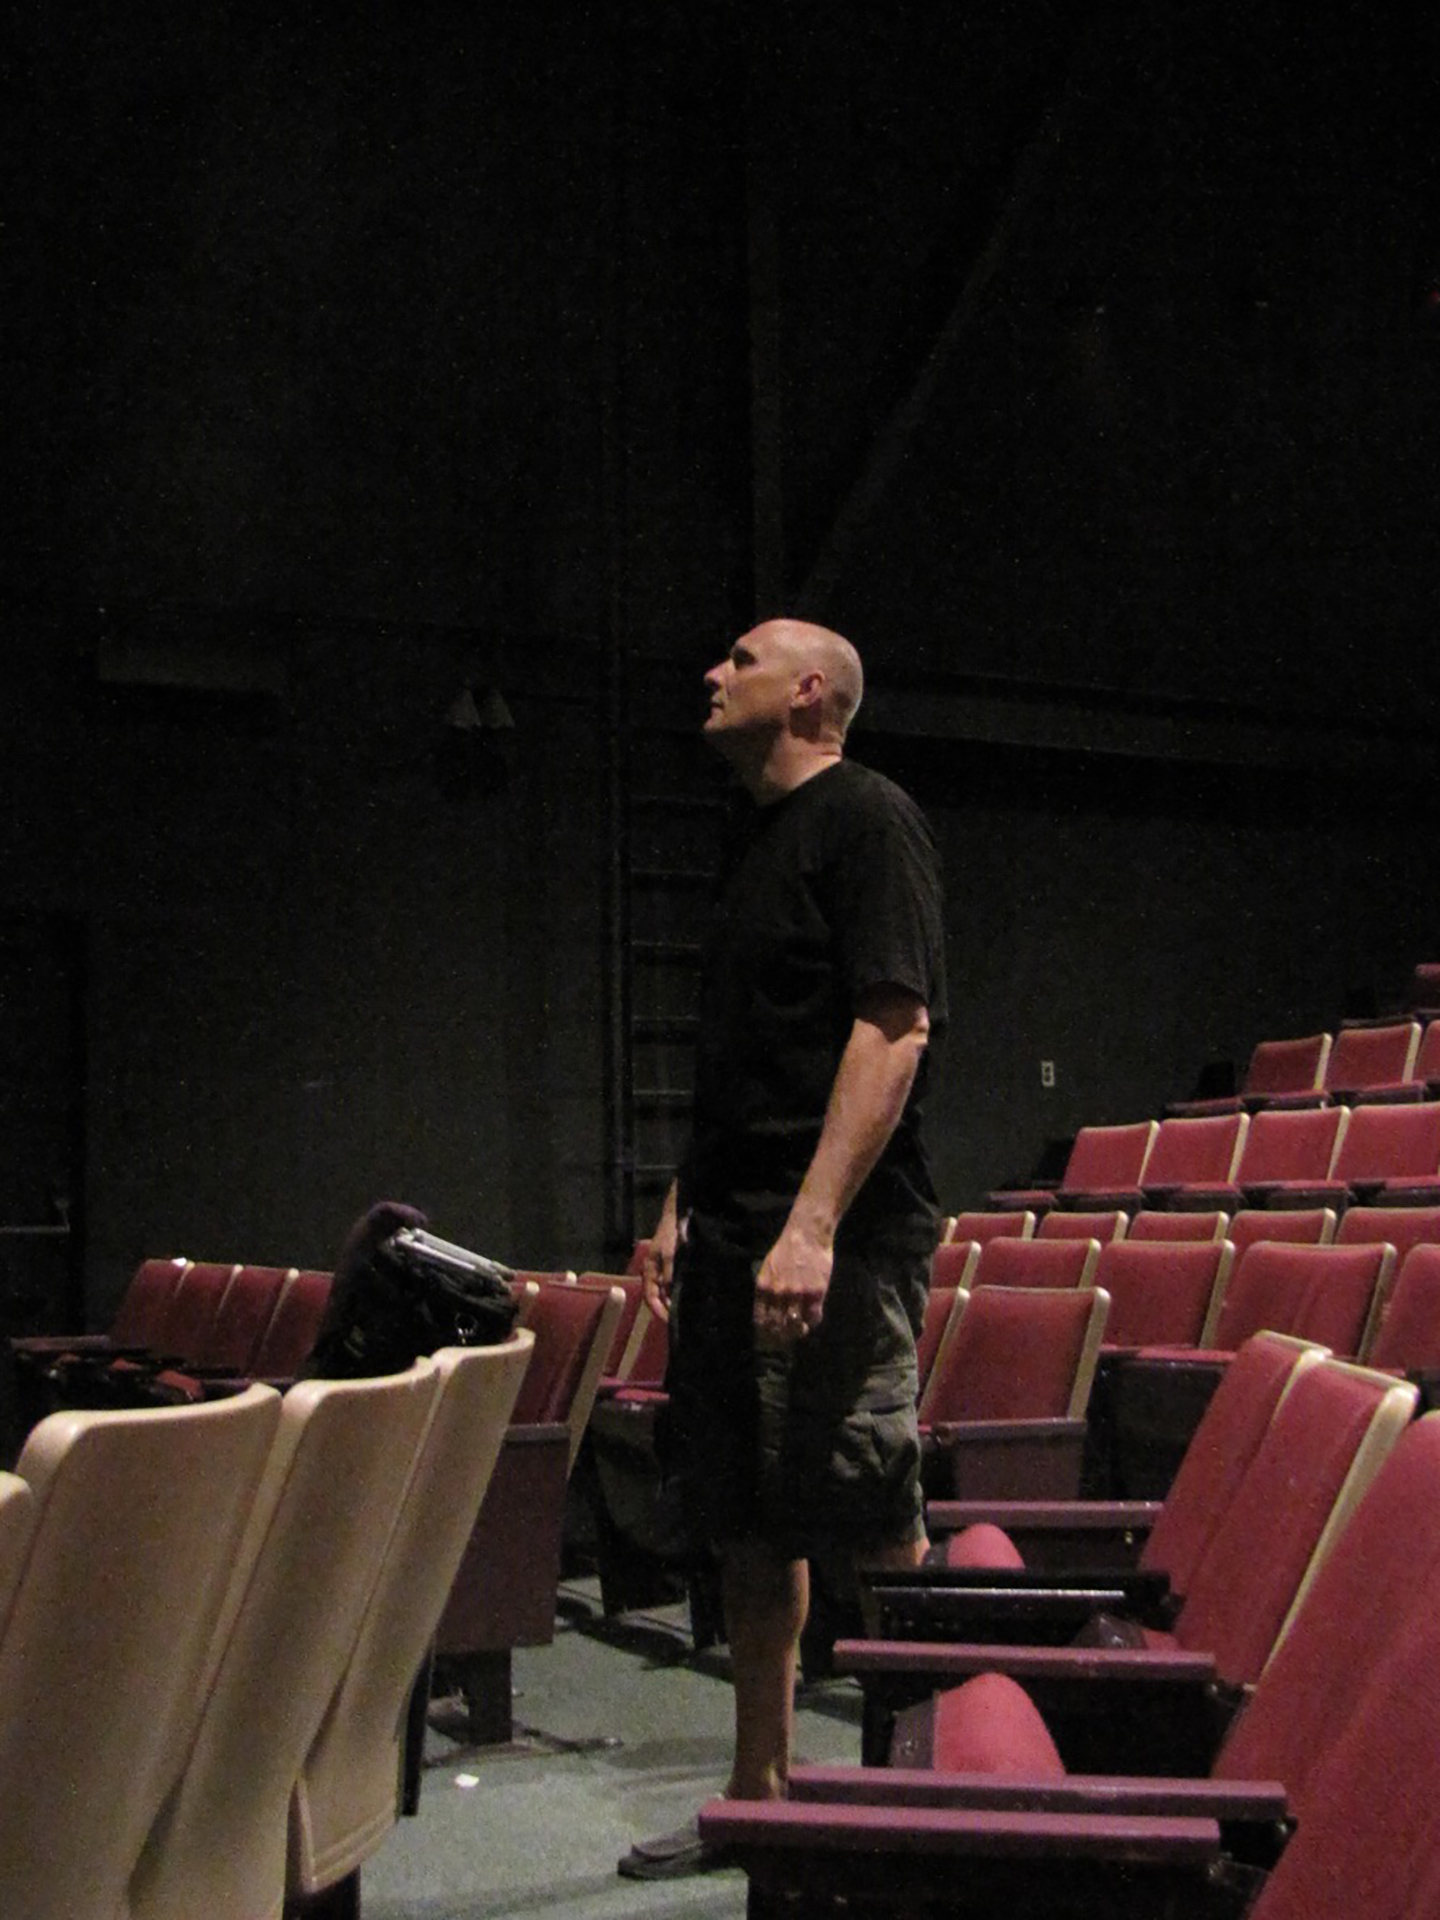 Kevin from the floor - Malaspina Theatre (Nanaimo, 2013)